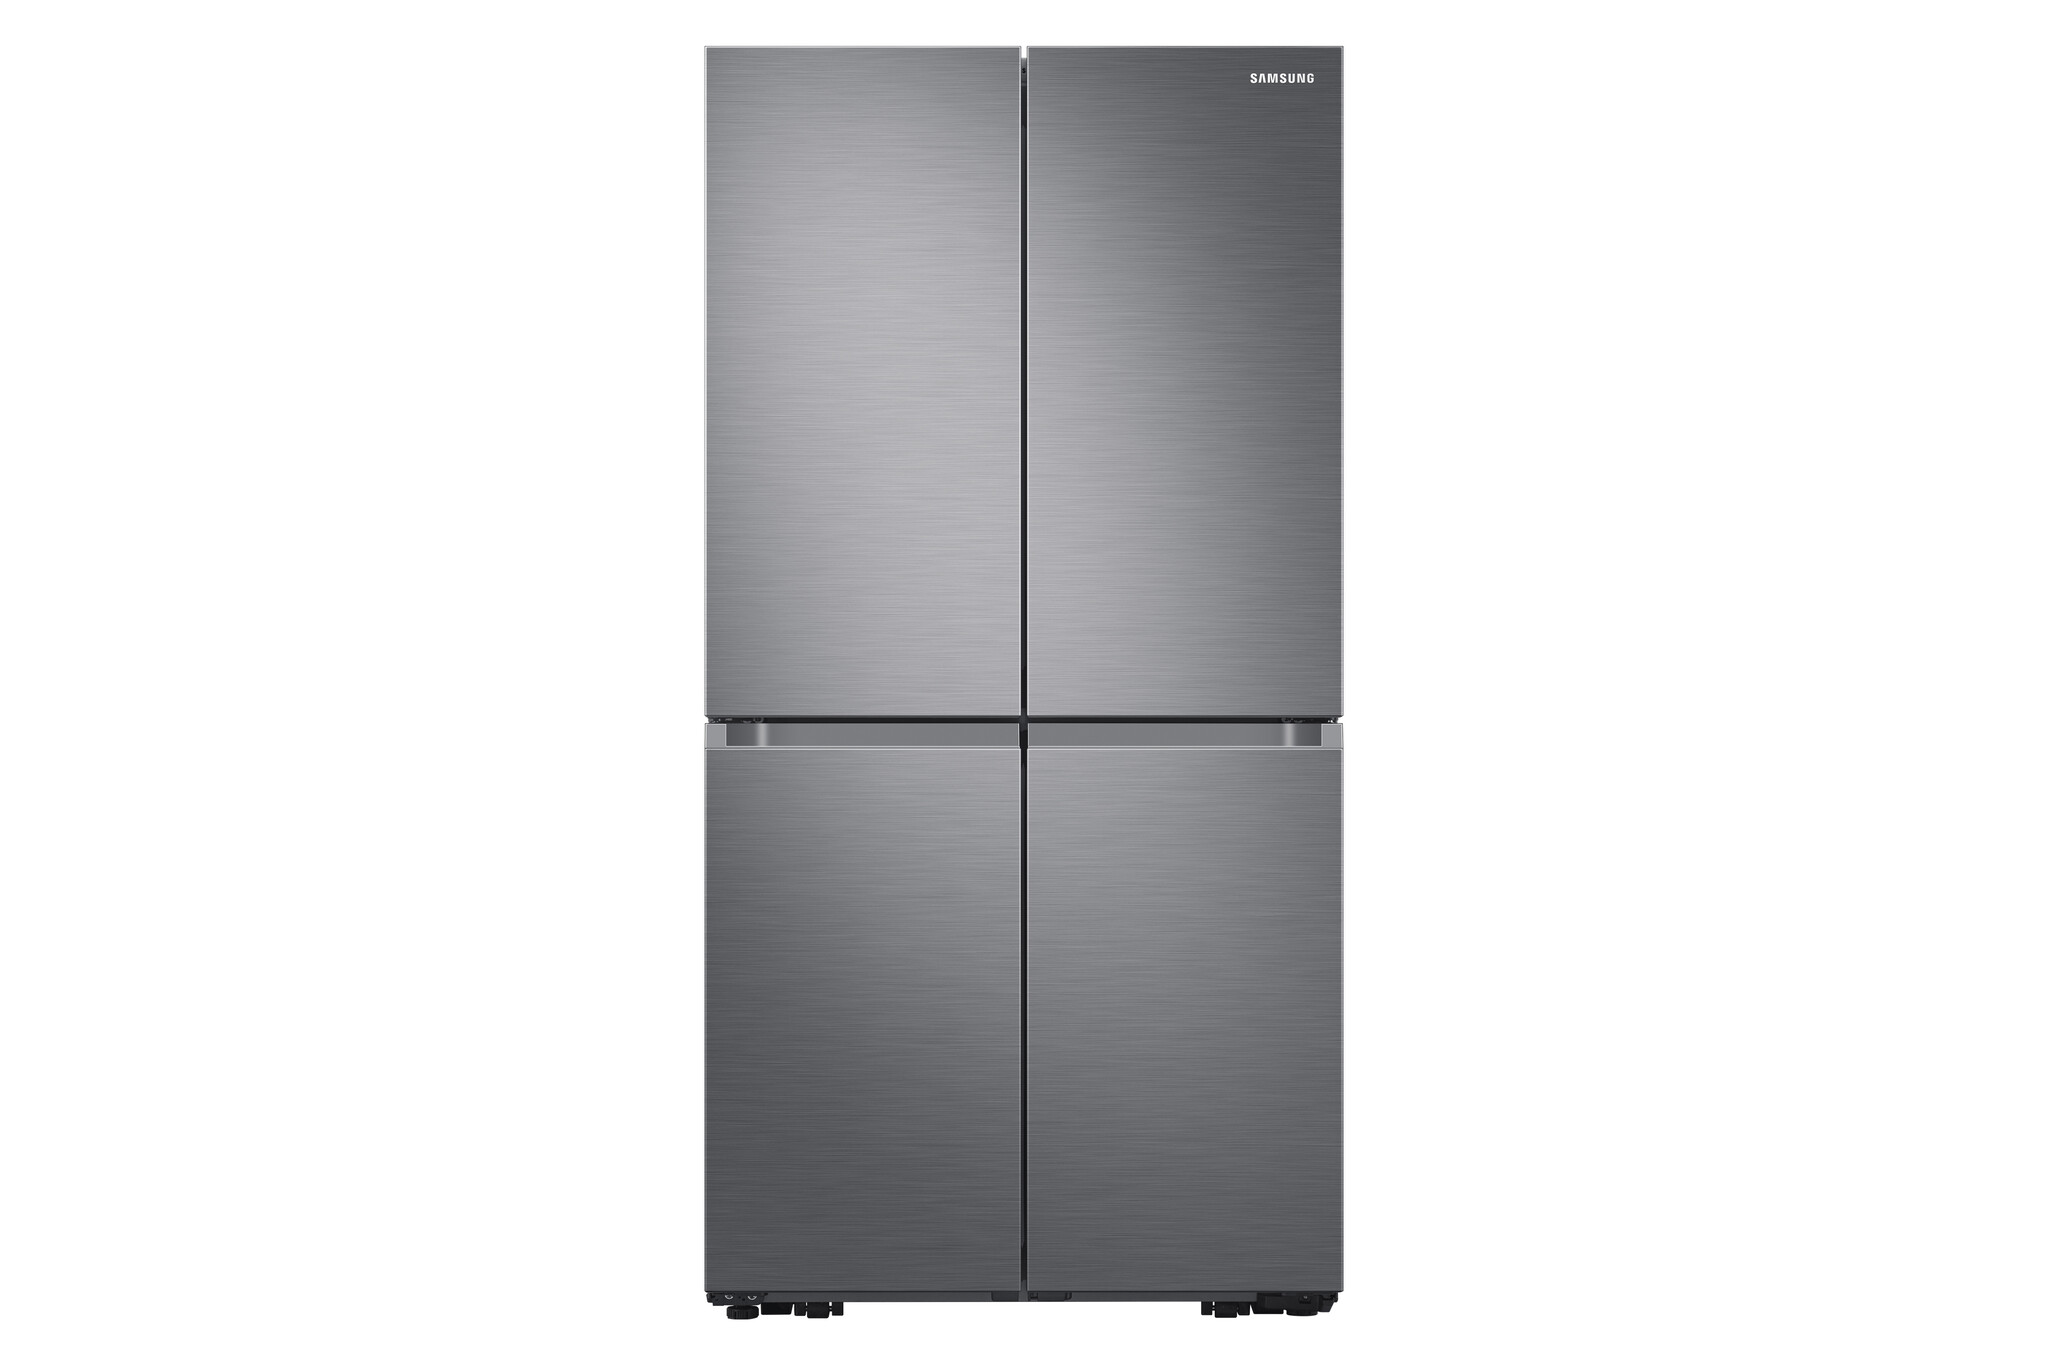 Samsung Series 9 RF65A967FS9 Plumbed Total No Frost American Fridge Freezer with Beverage Center™ – Matte Stainless Steel – F Rated #360527